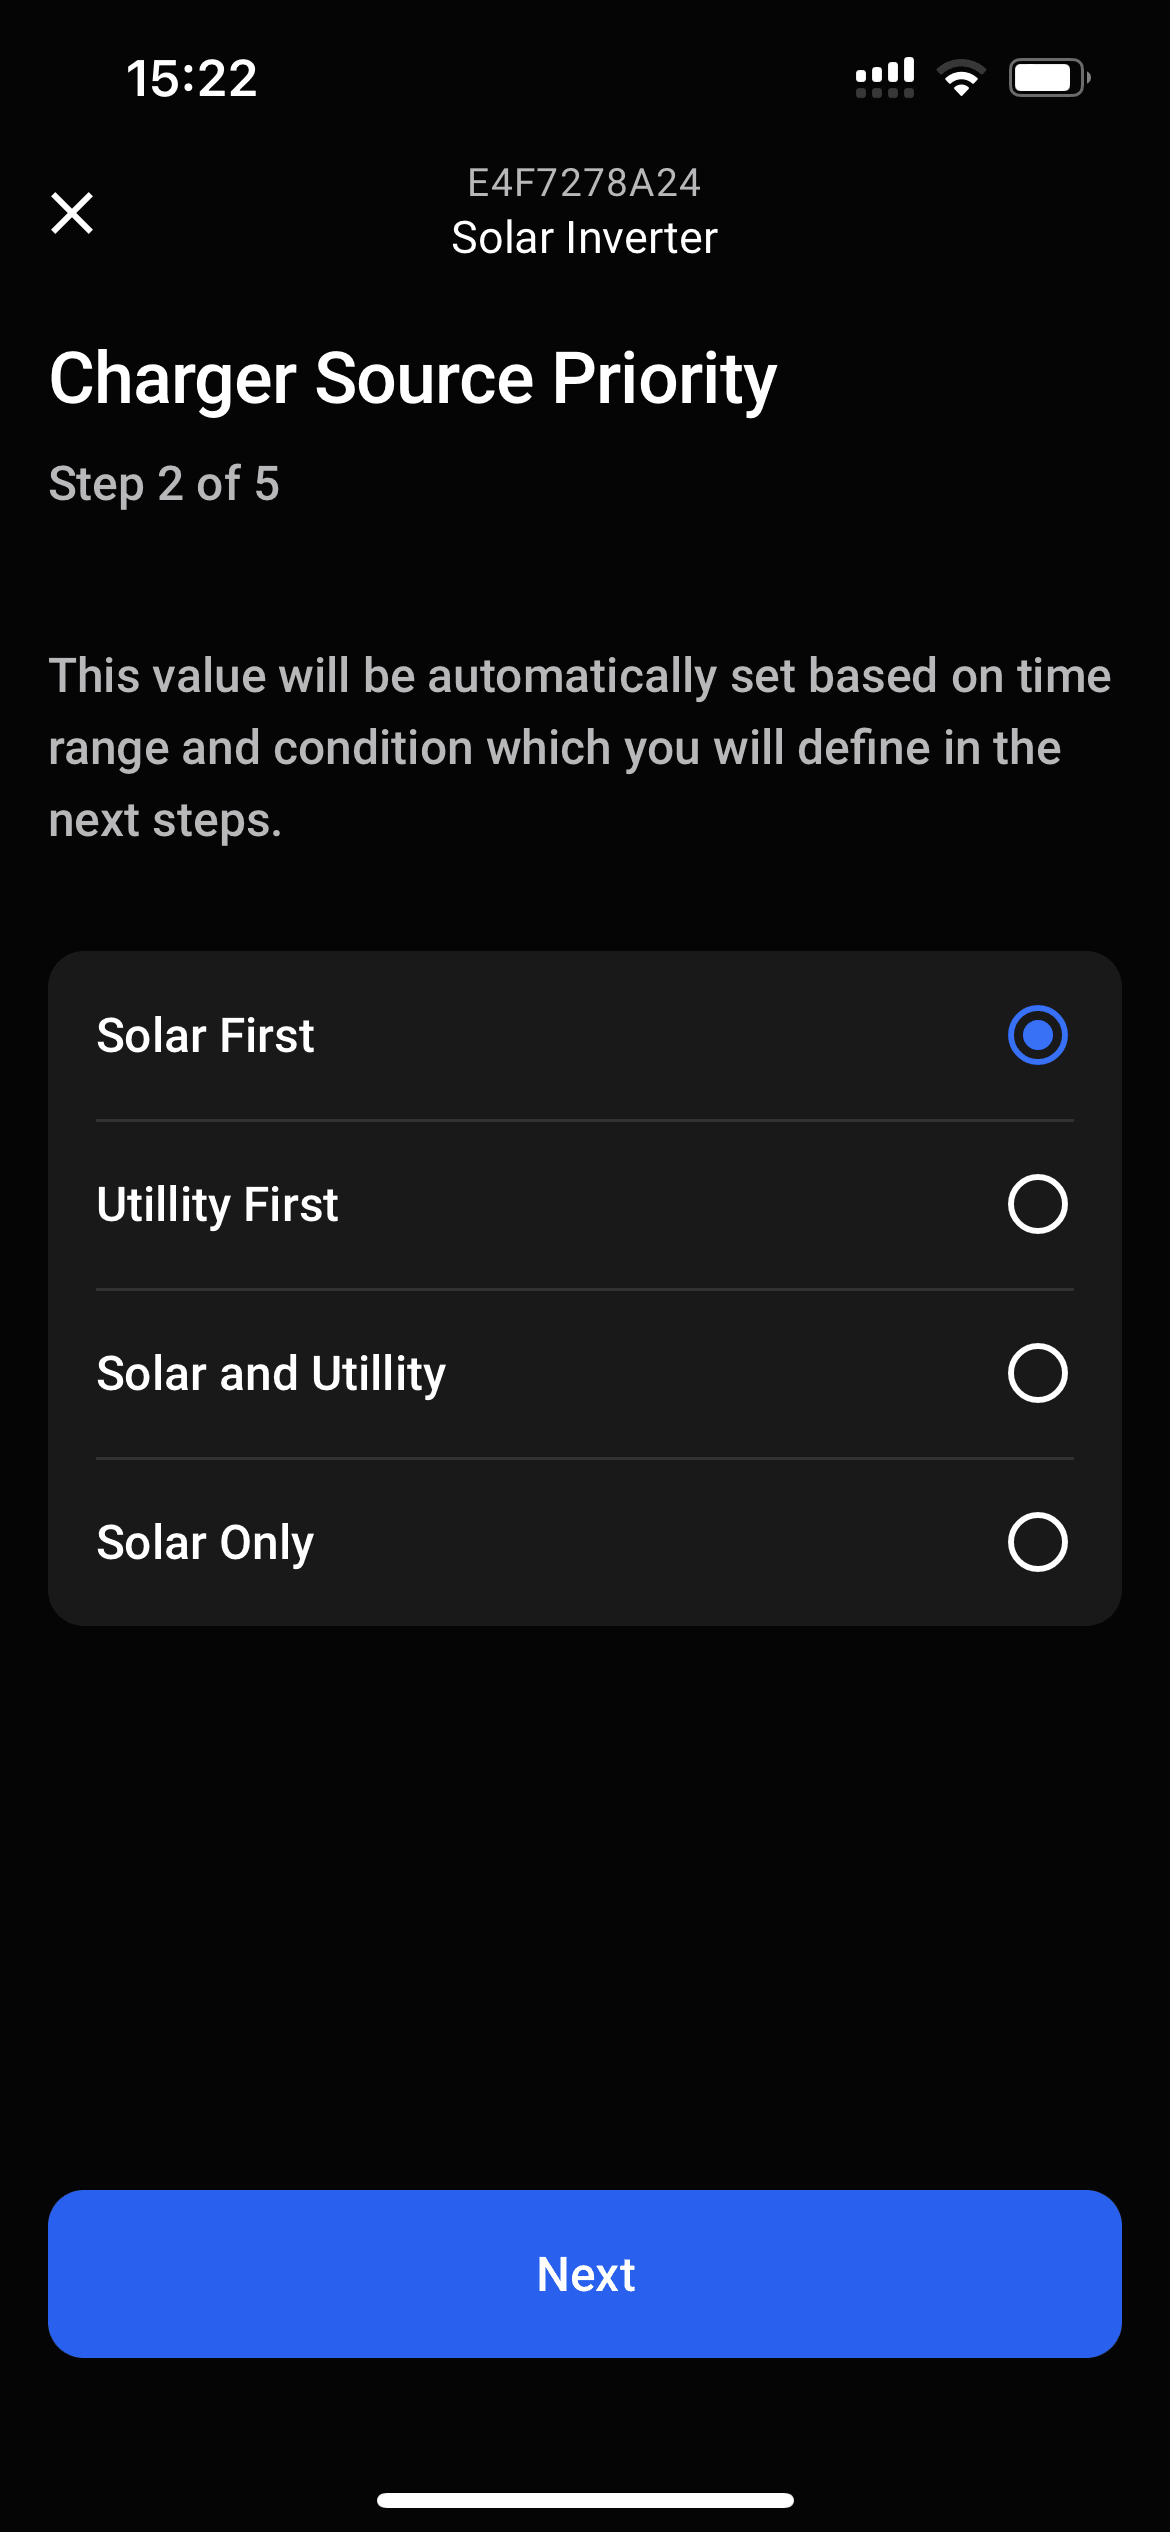 Select the priority setting you'd like to set when the rule gets triggered